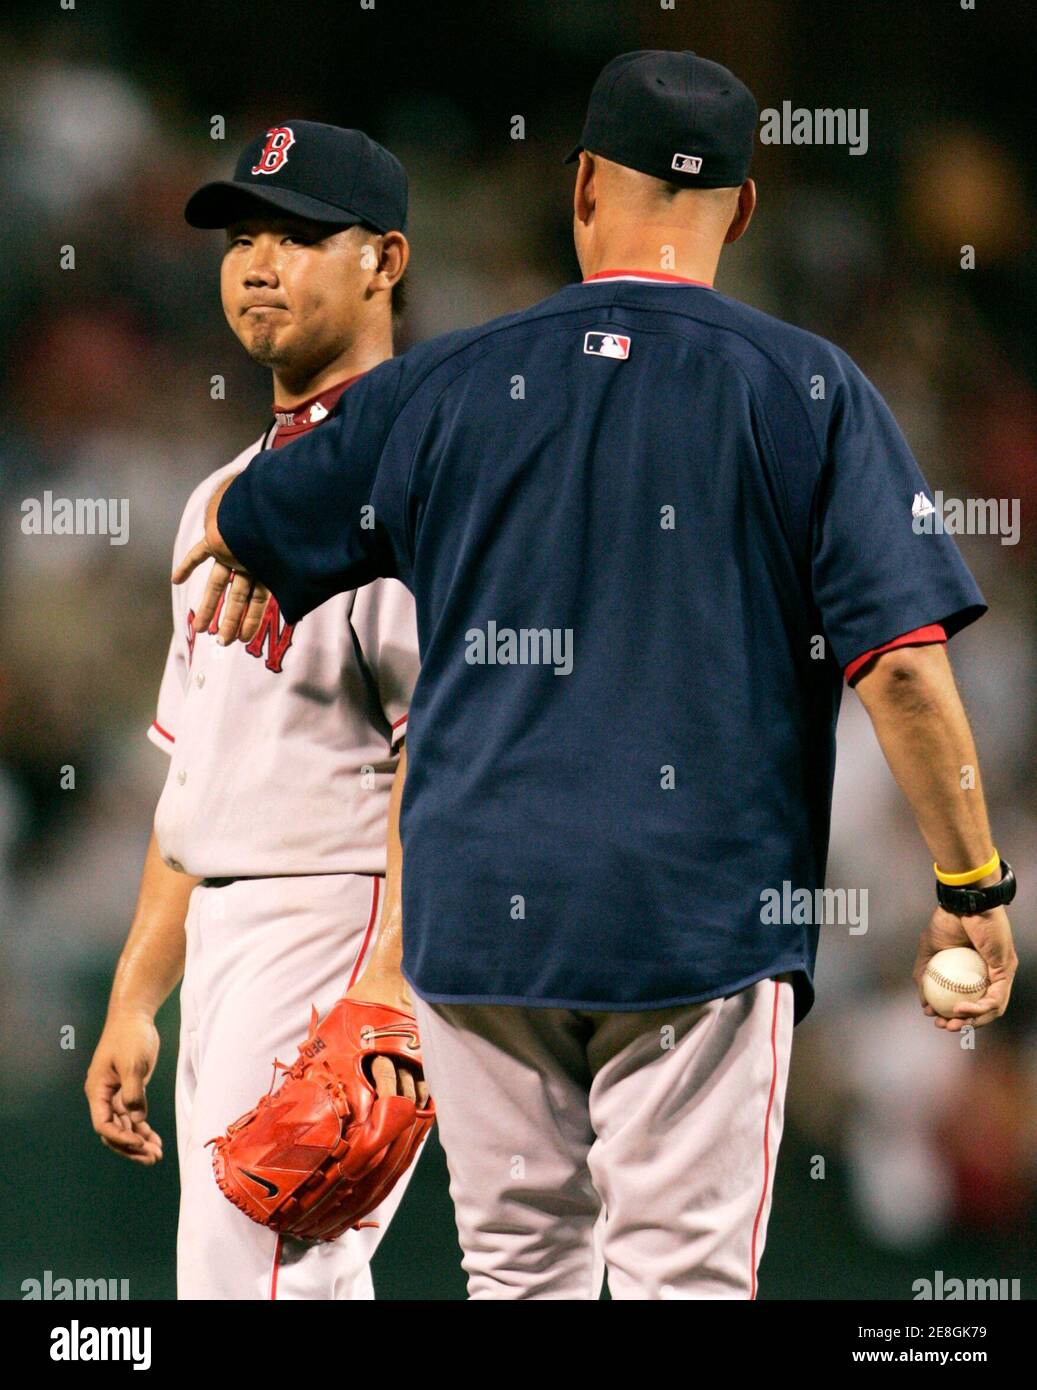 Boston Red Sox starting pitcher Daisuke Matsuzaka (L) is taken out of the game by manager Terry Francona after giving up seven runs to the Baltimore Orioles in the third inning of their MLB American League baseball game in Baltimore, Maryland September 8, 2007.     REUTERS/Gary Cameron    (UNITED STATES) Stock Photo